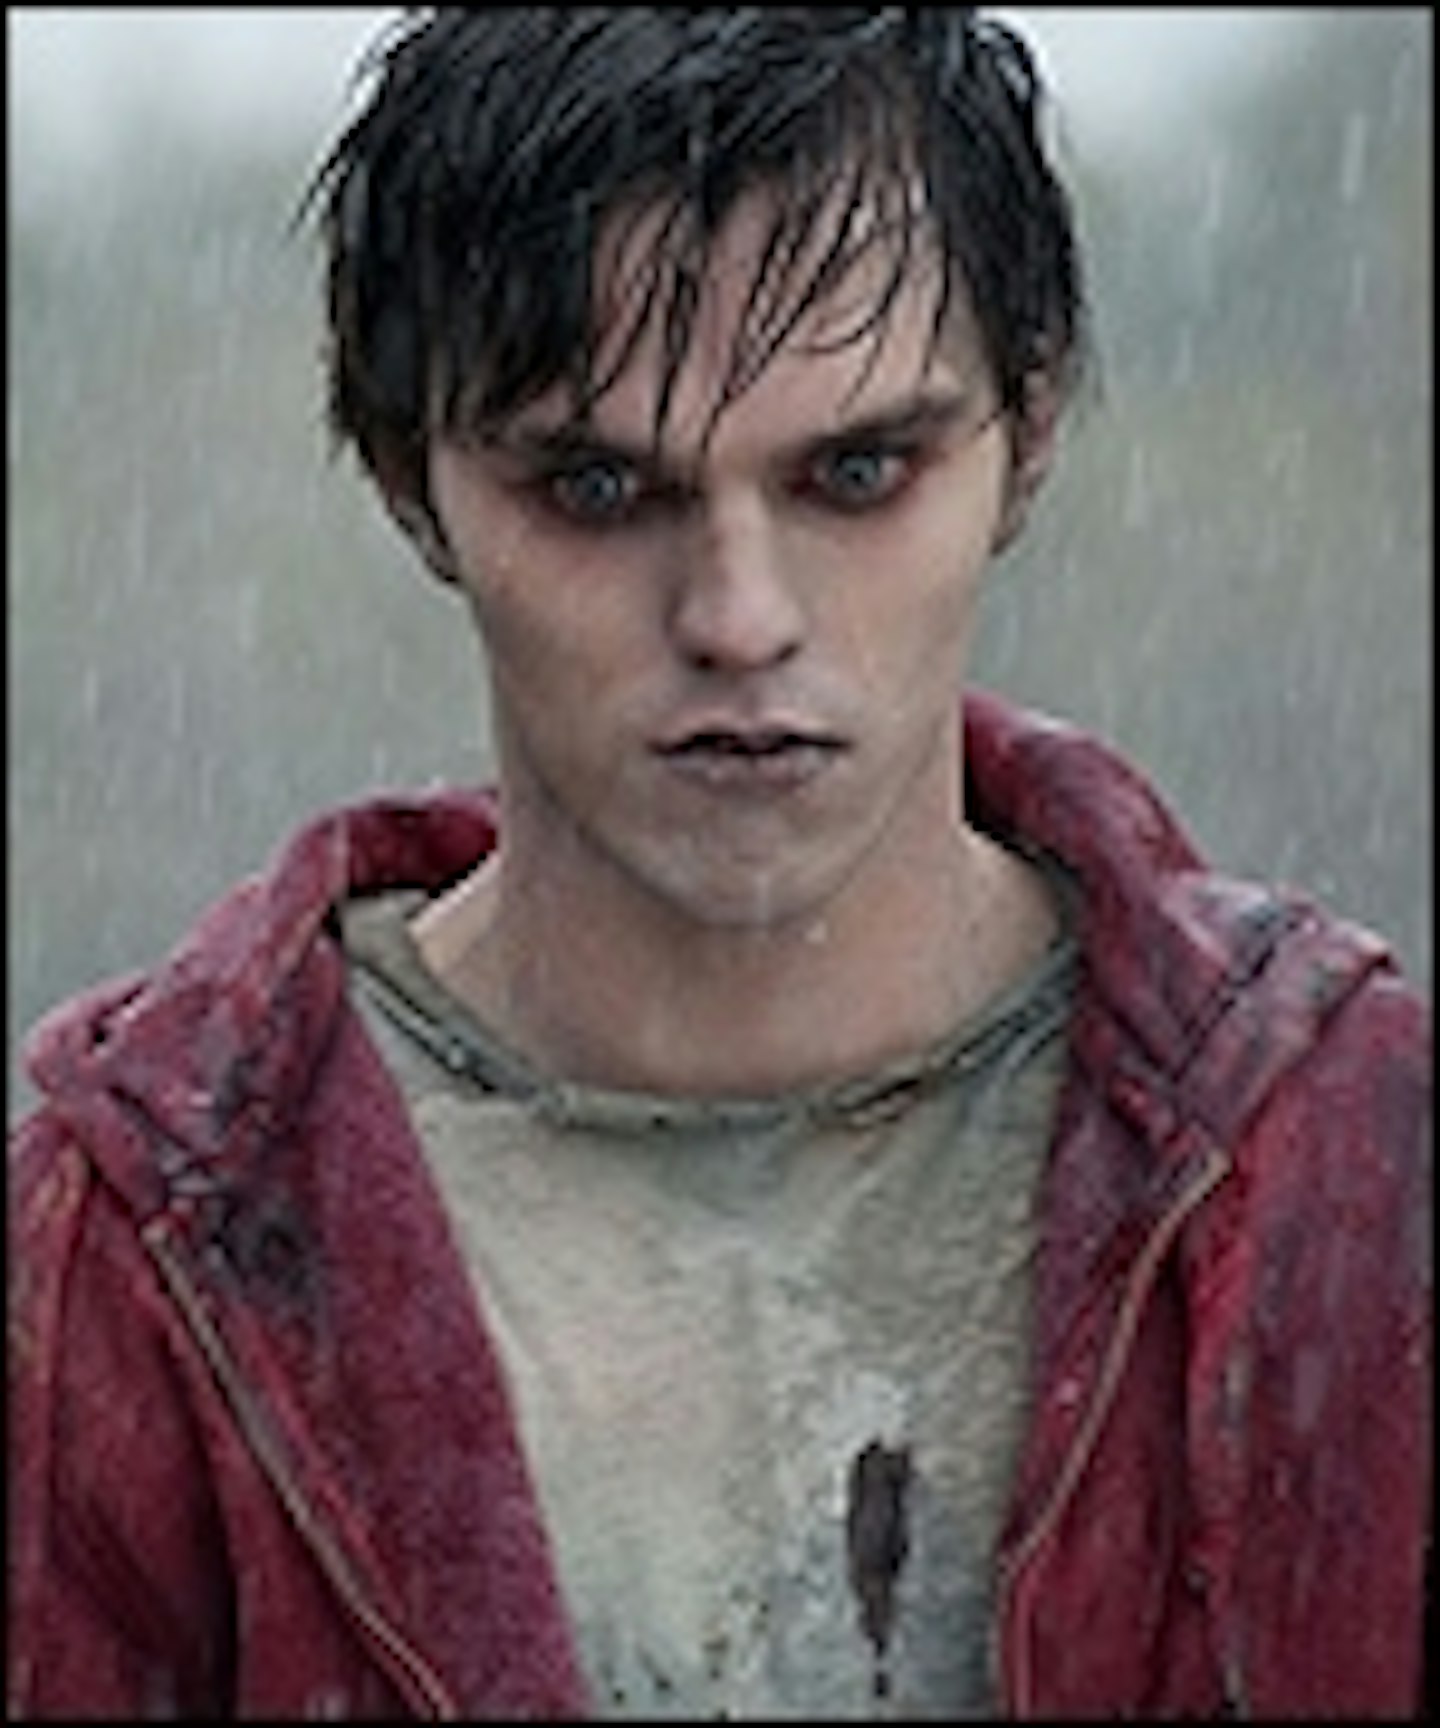 New Warm Bodies Clip Surfaces